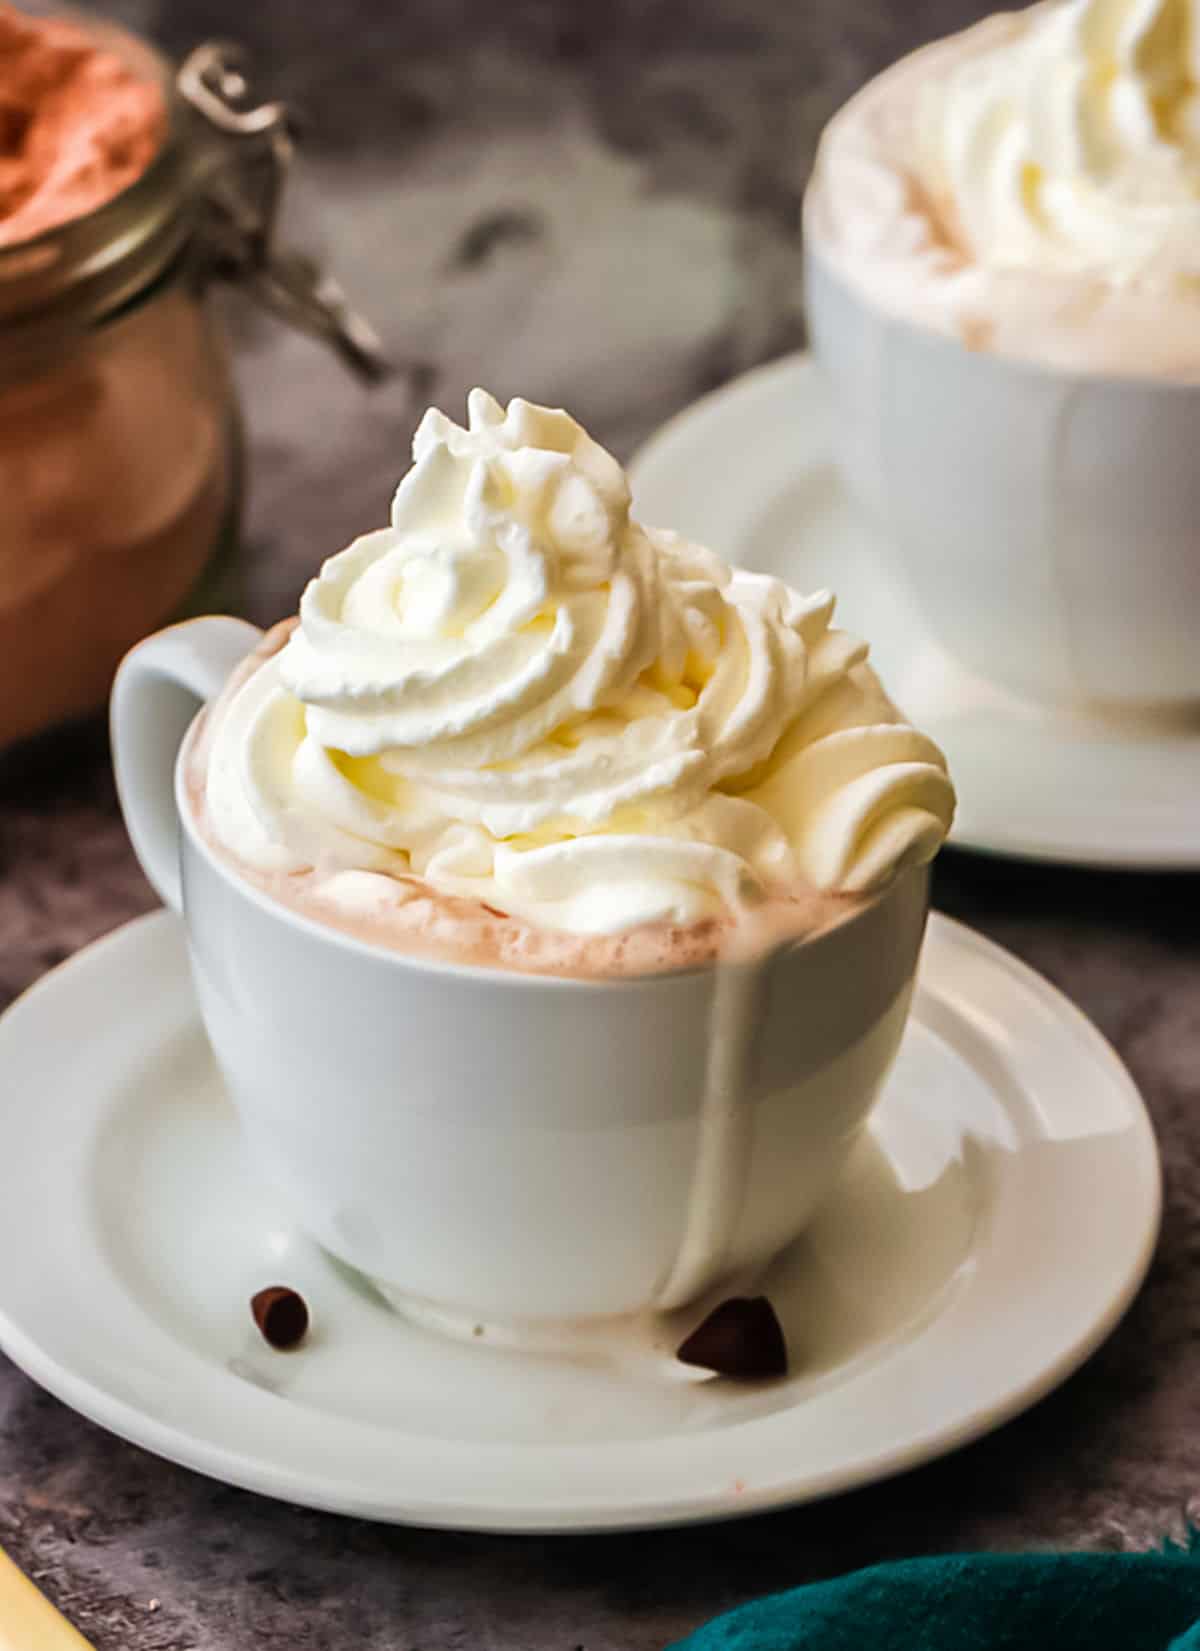 Whipped cream topped hot chocolate in a white cup with plate. Grey surface. 